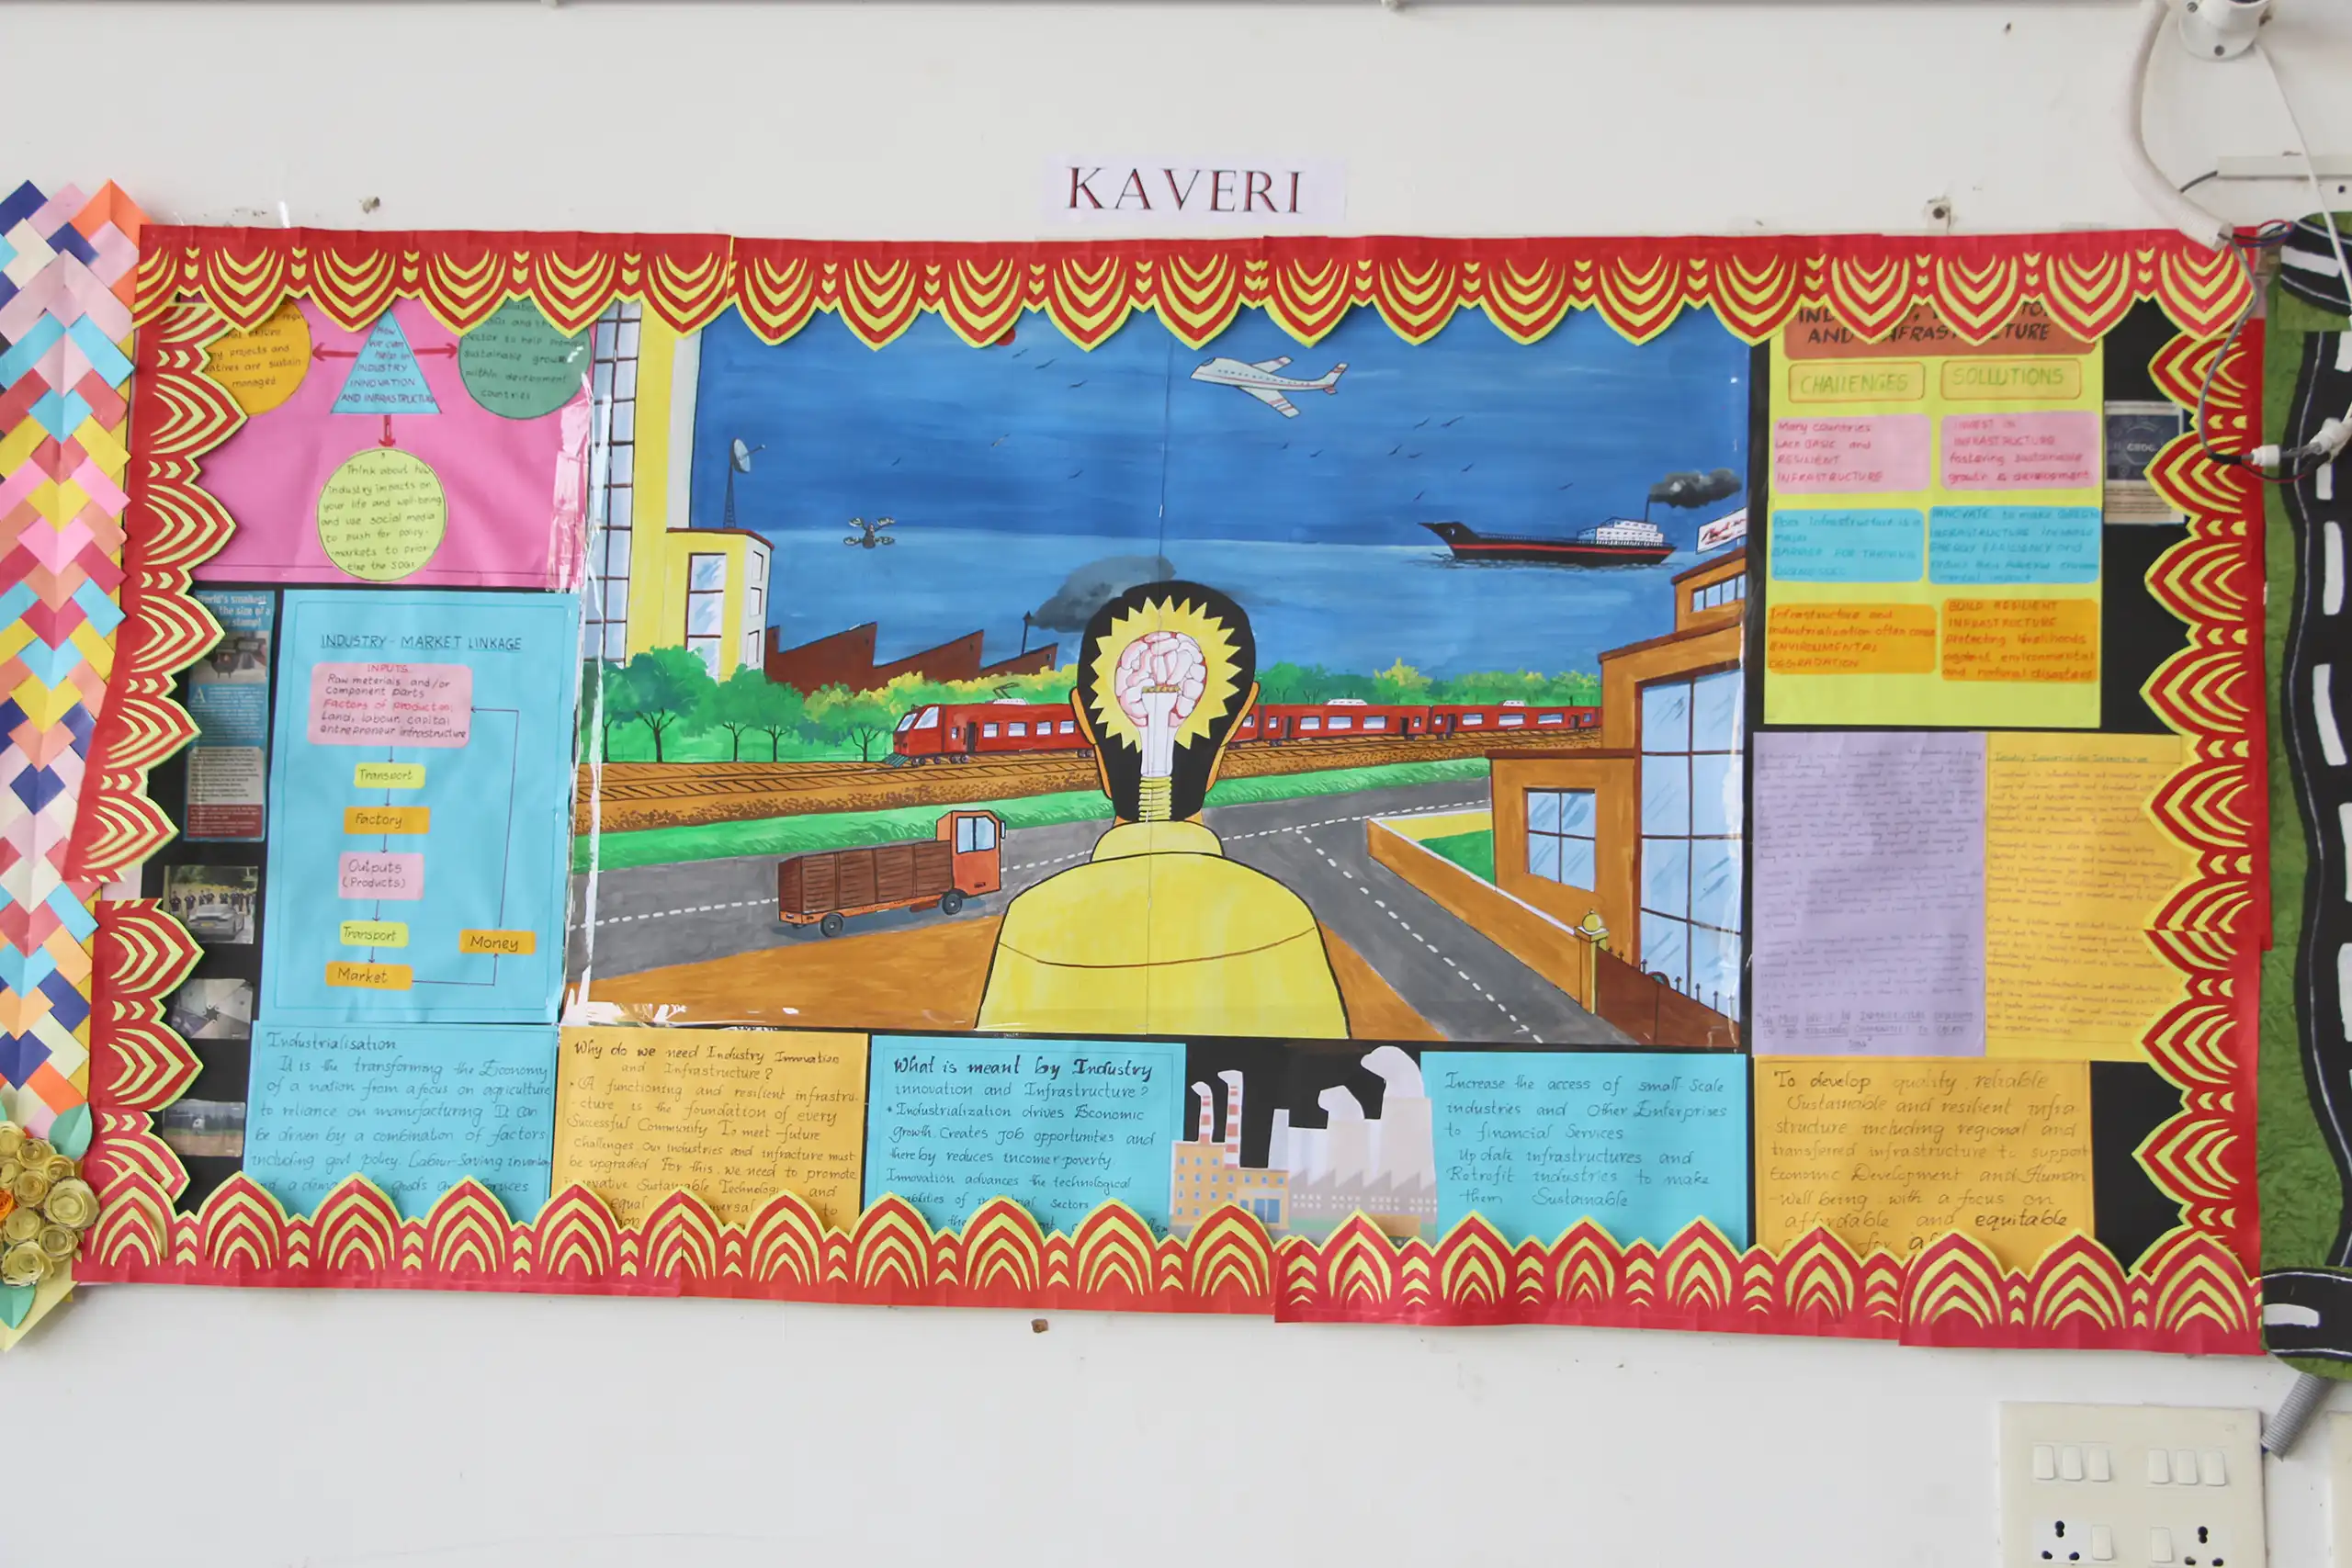 Kaveri House decorated bulletin board with innovative ideas during House-Wise Bulletin Board Competition.